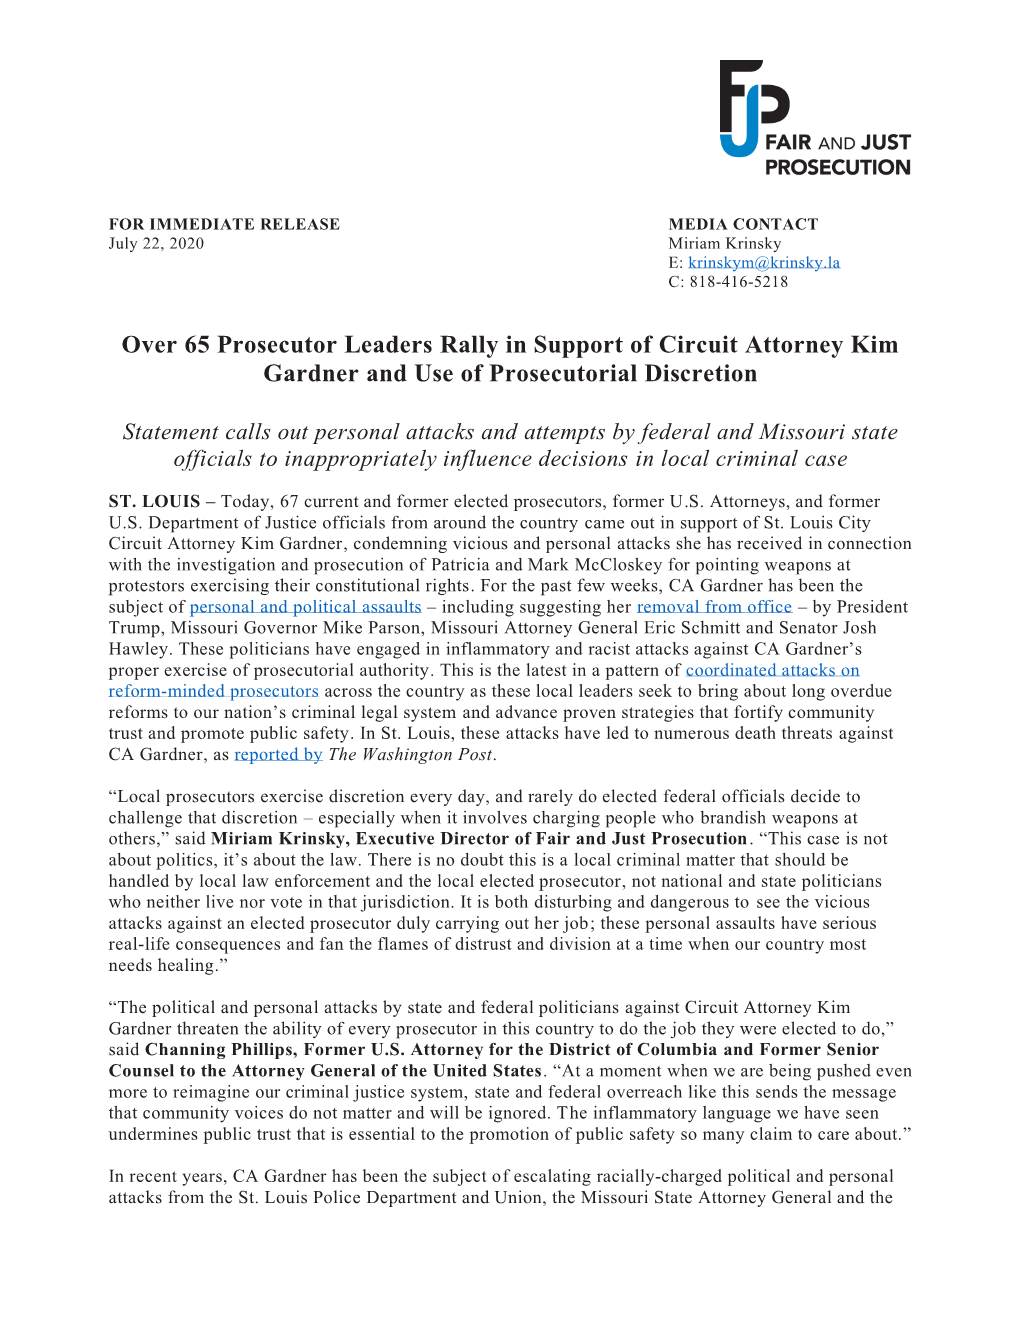 Over 65 Prosecutor Leaders Rally in Support of Circuit Attorney Kim Gardner and Use of Prosecutorial Discretion